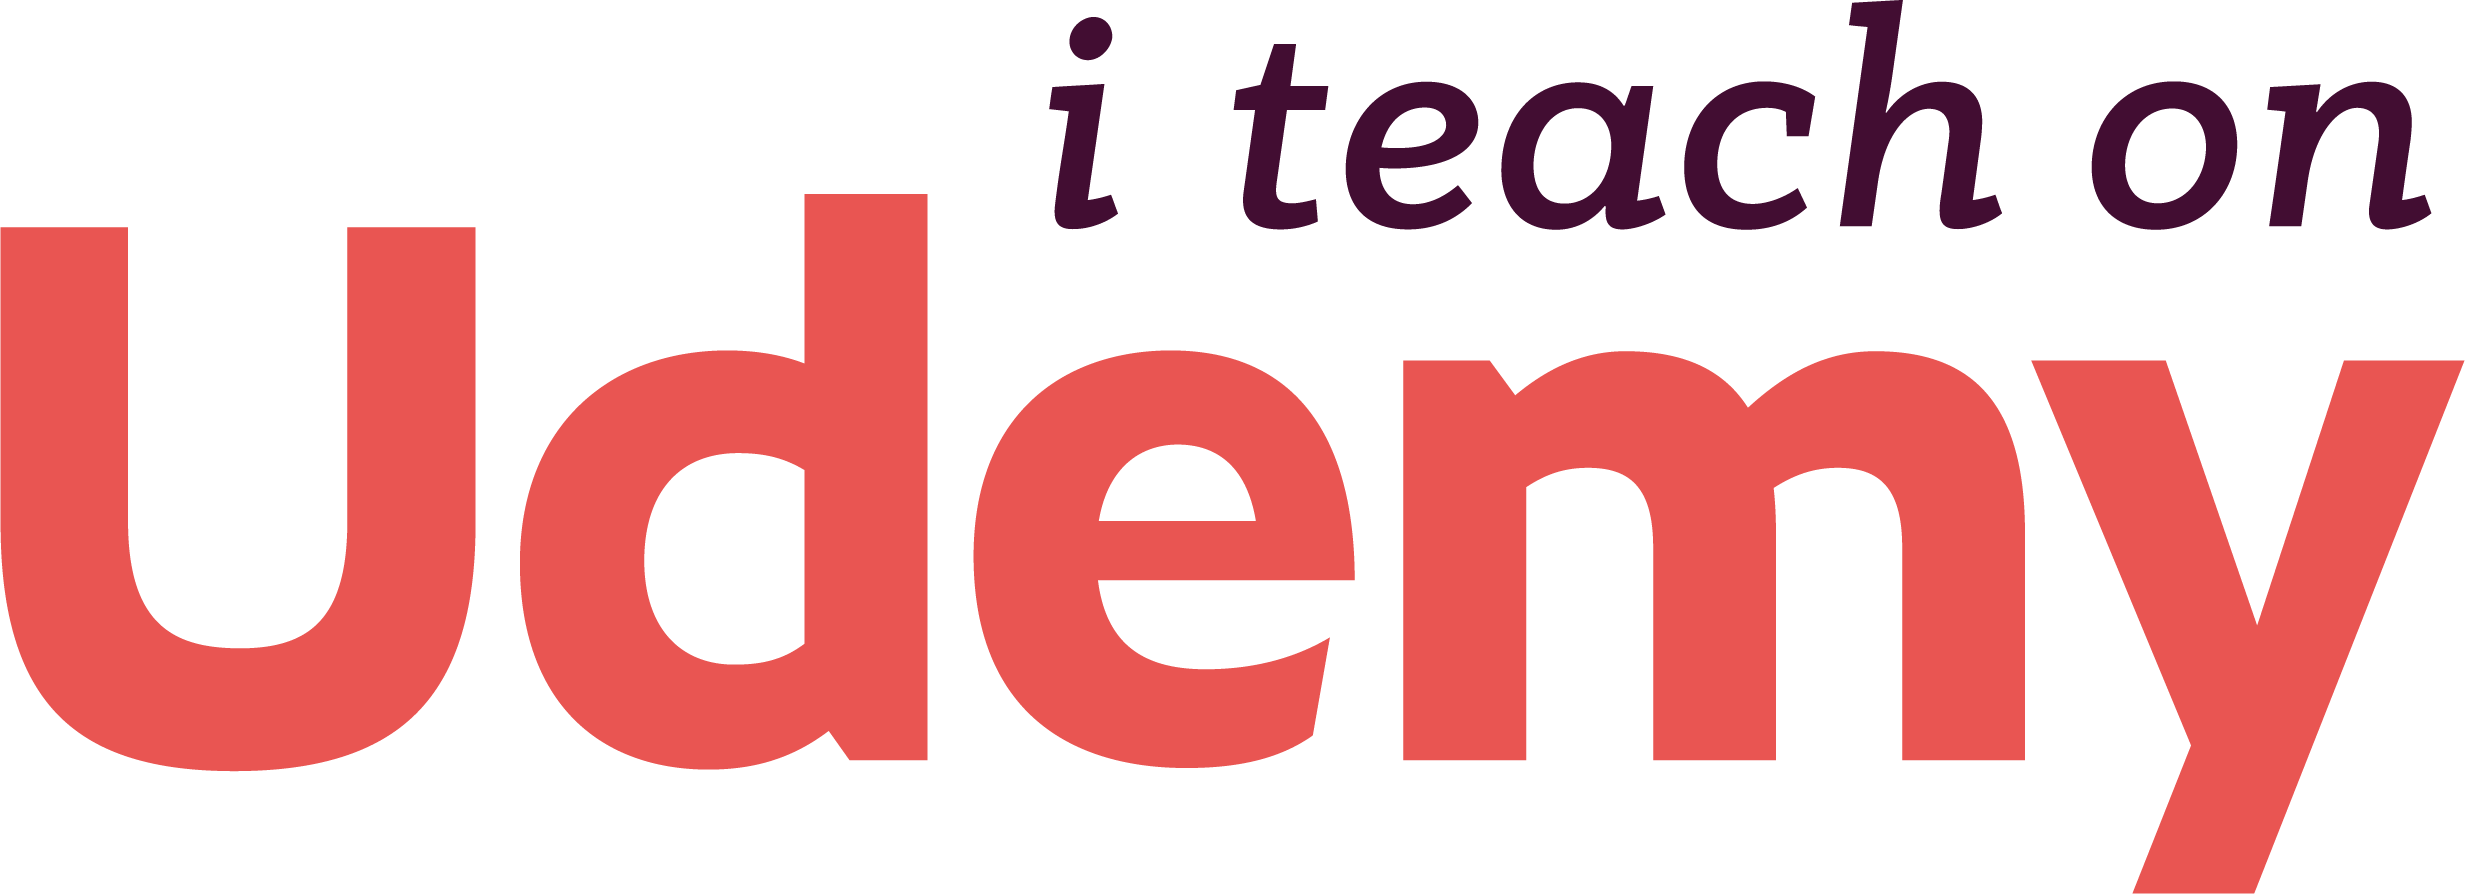 What is Udemy?